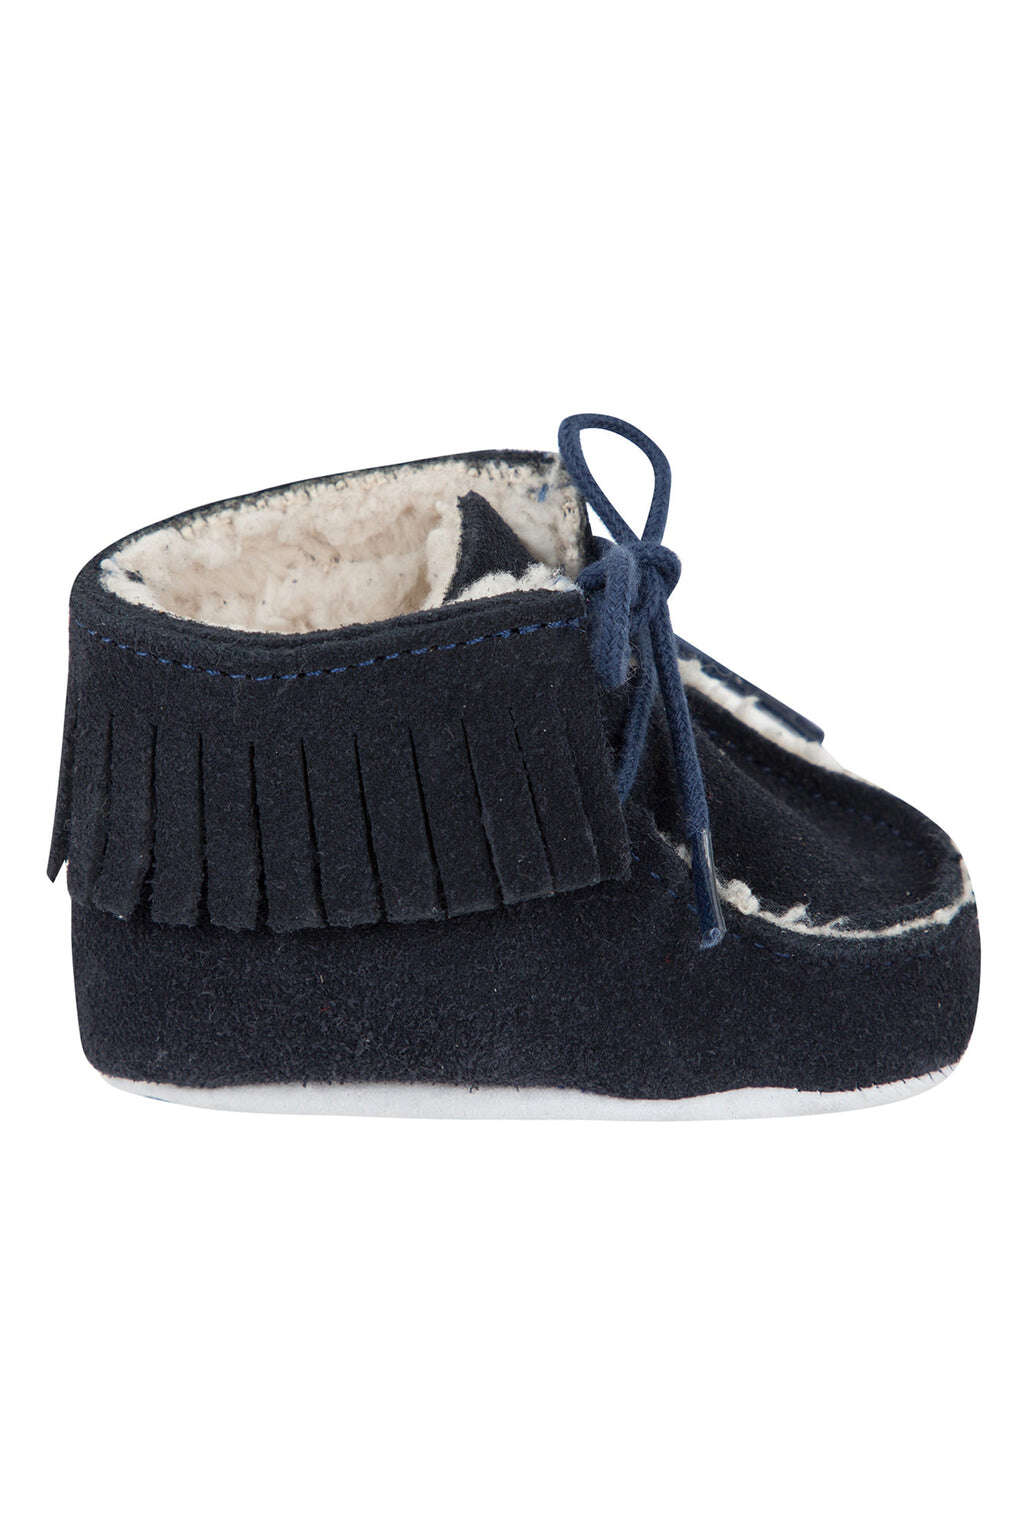 Shoes - Navy has Fringed